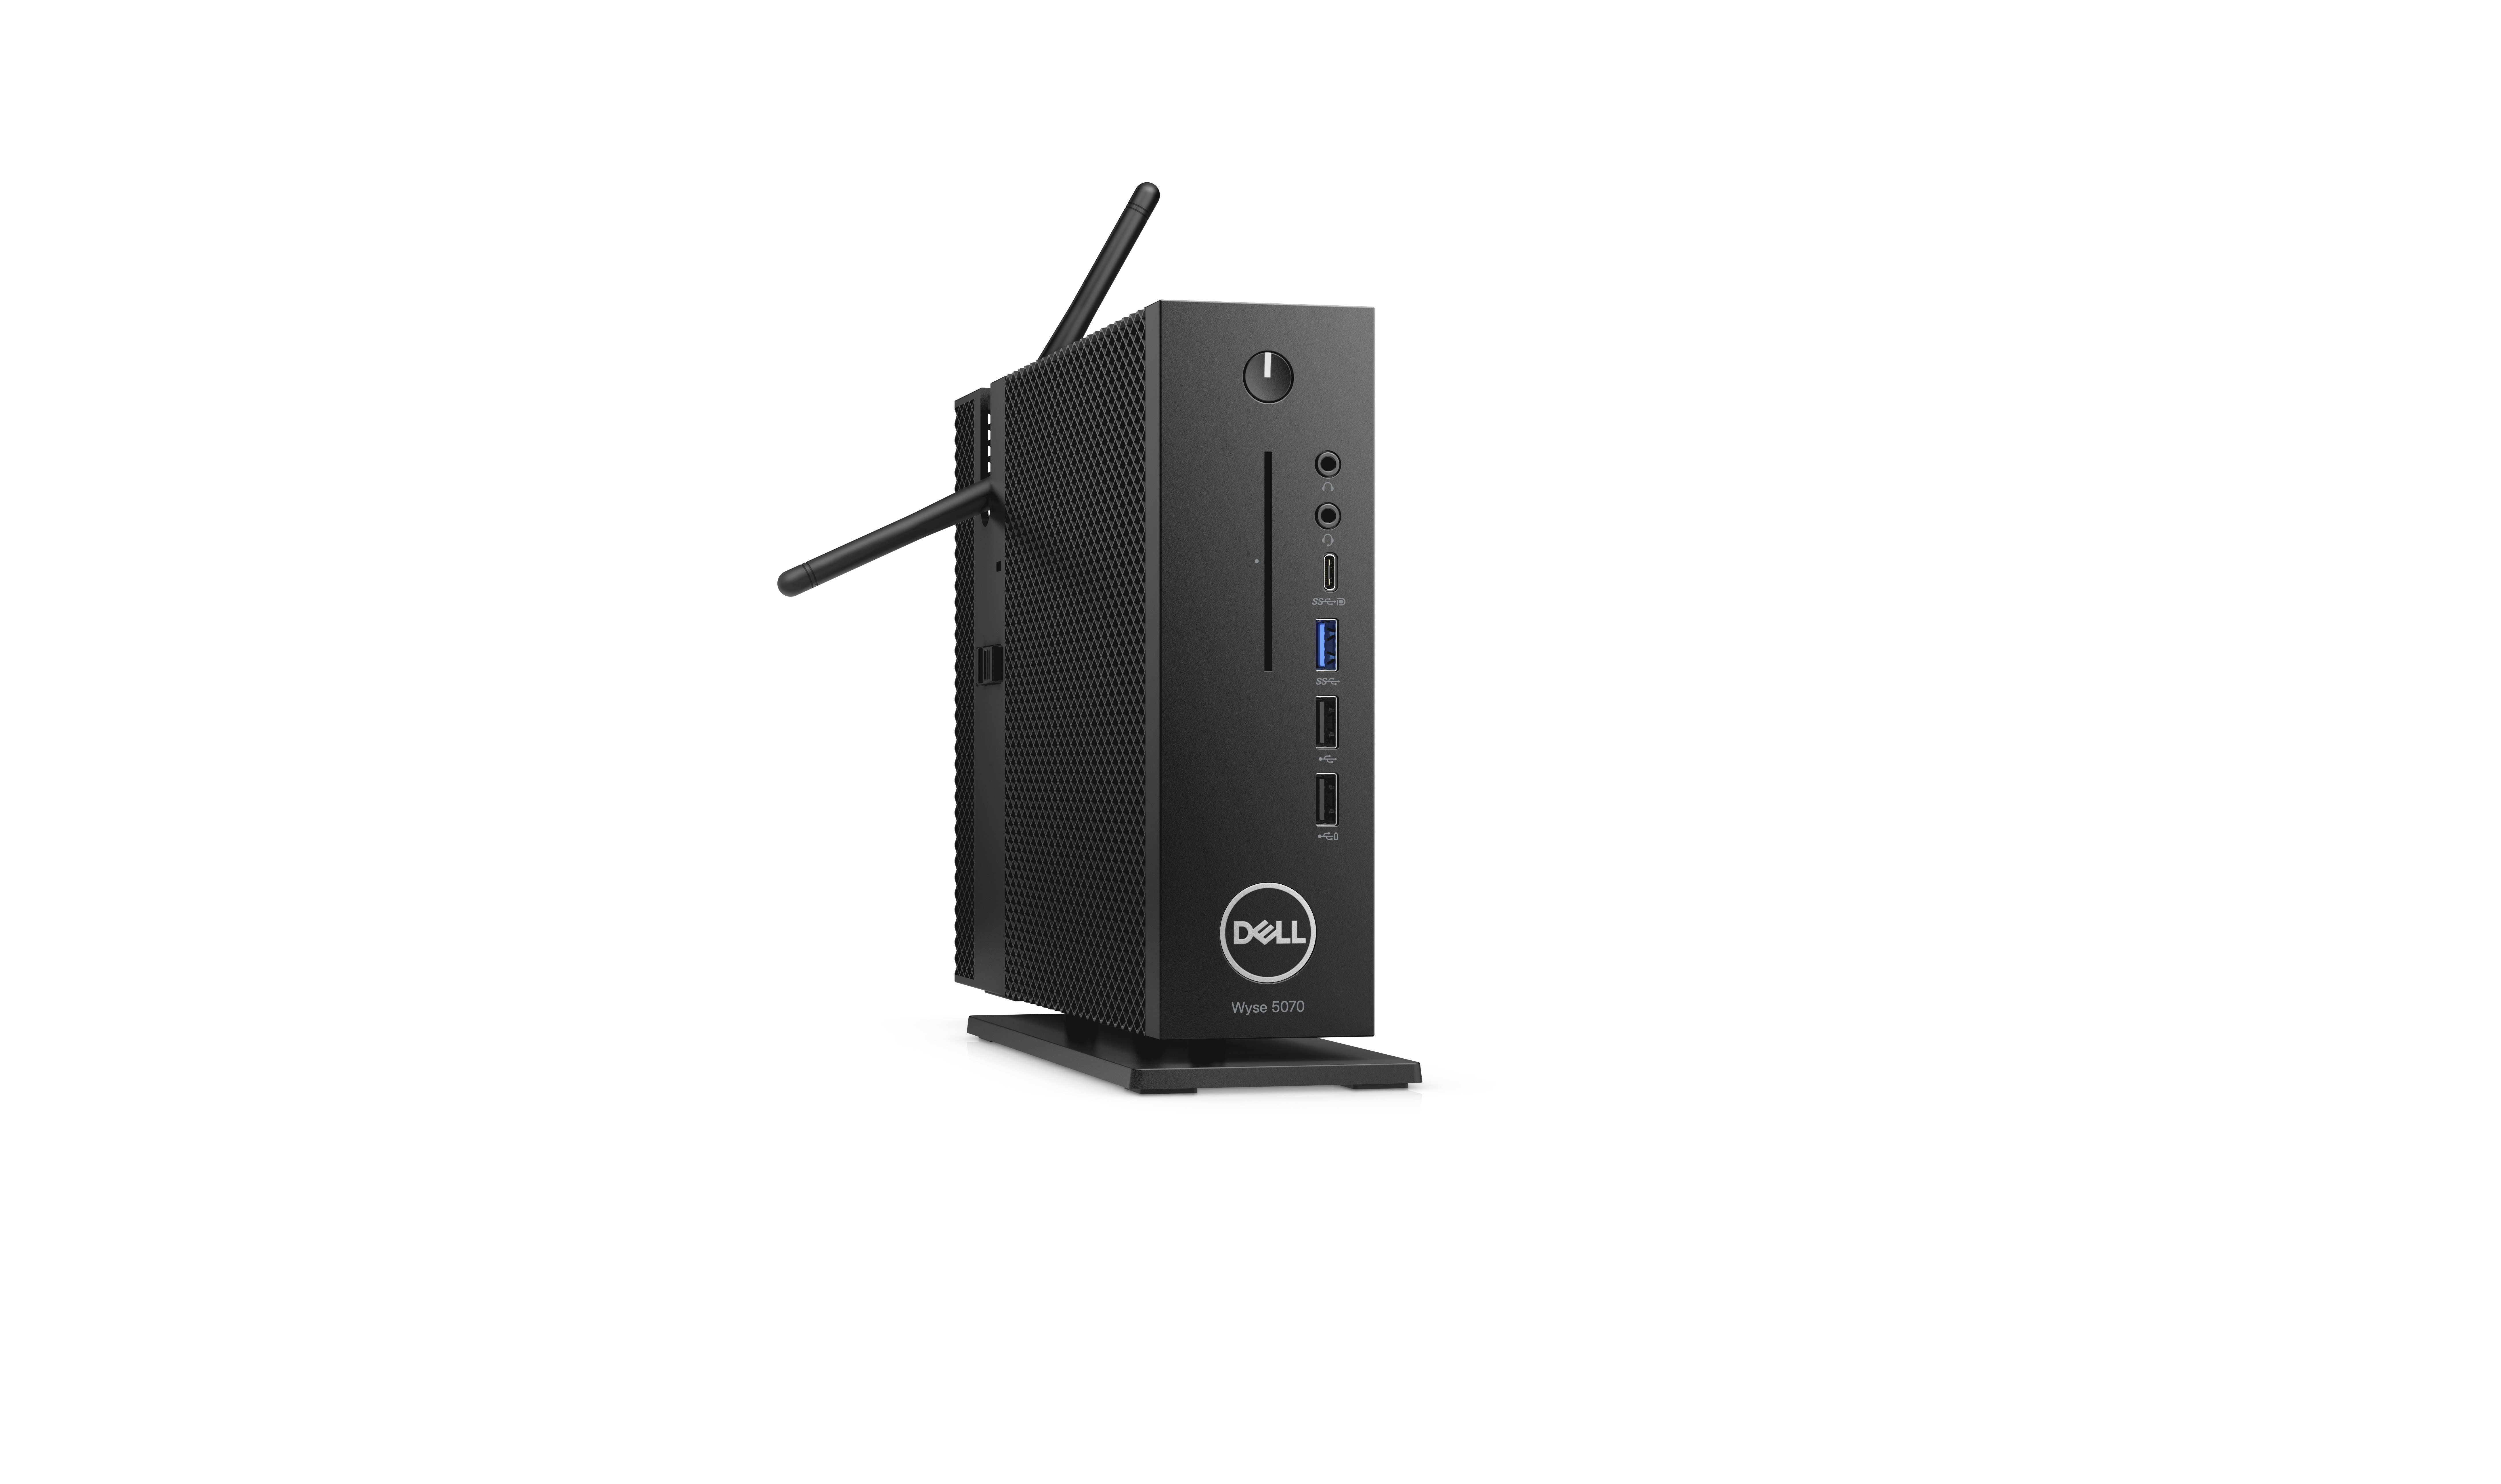 Dell Wyse 5070 – A Truly Global Thin Client